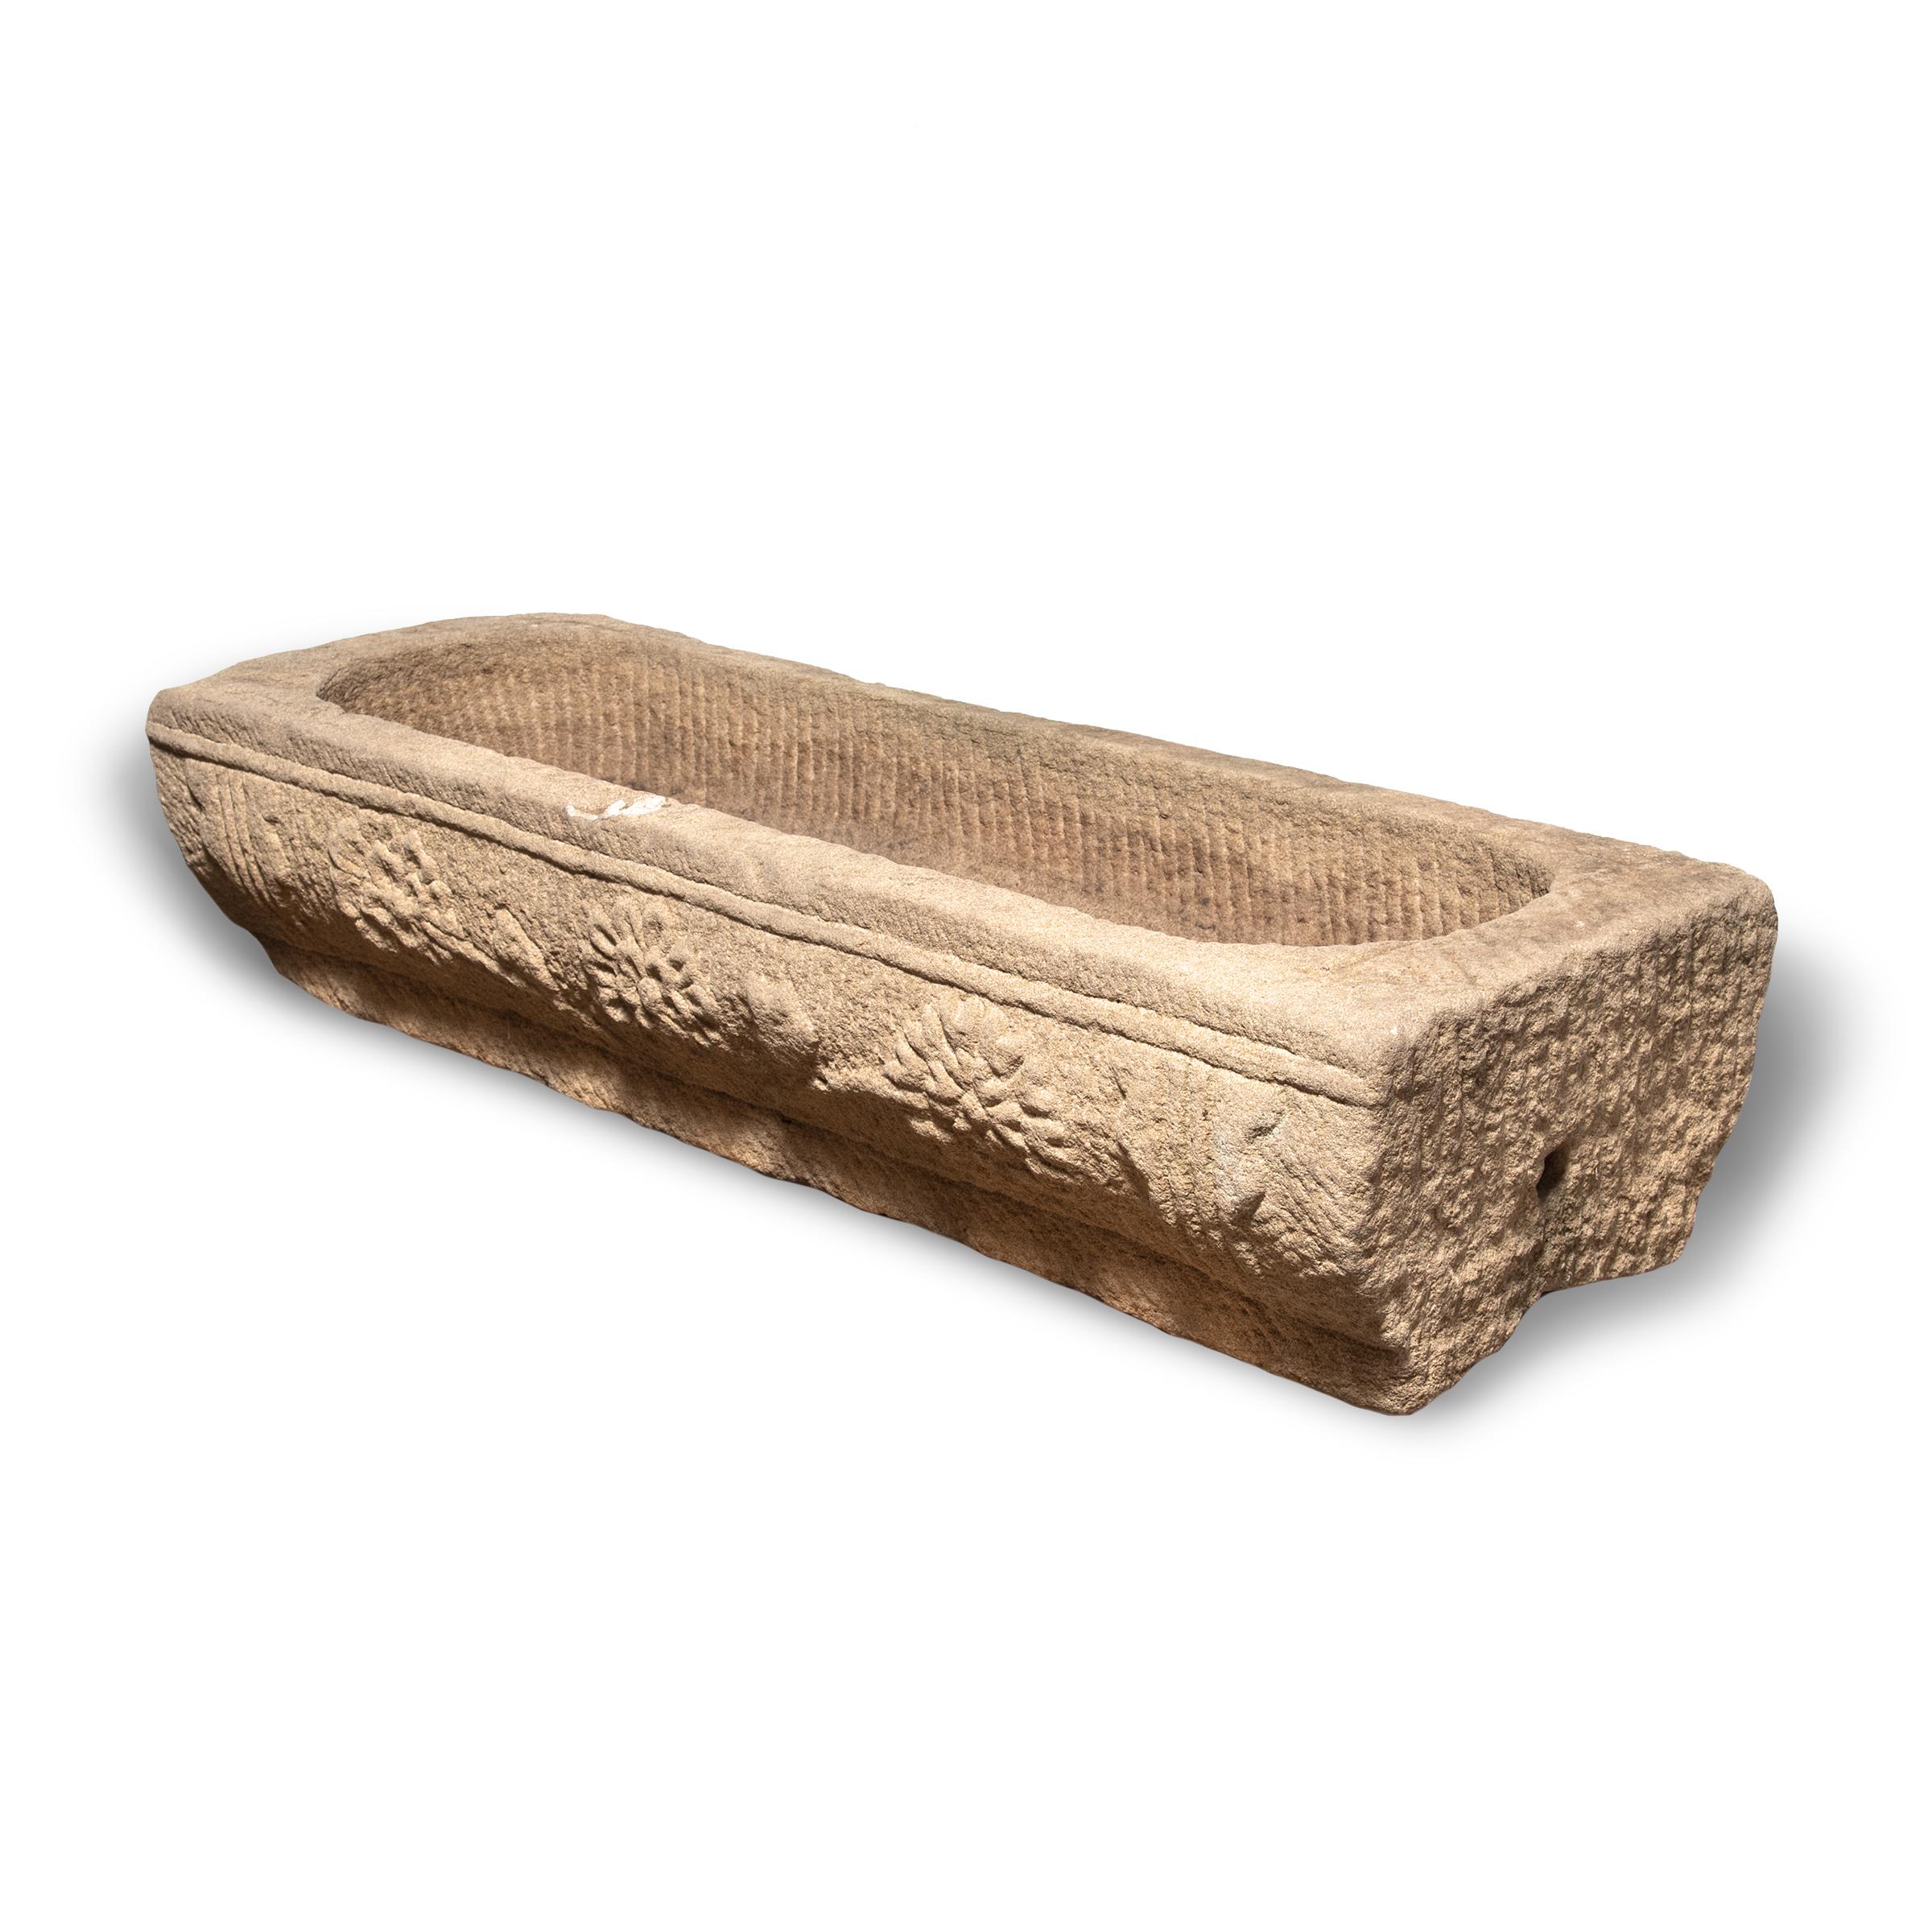 Hand-Carved Chinese Limestone Chrysanthemum Trough, c. 1800 For Sale